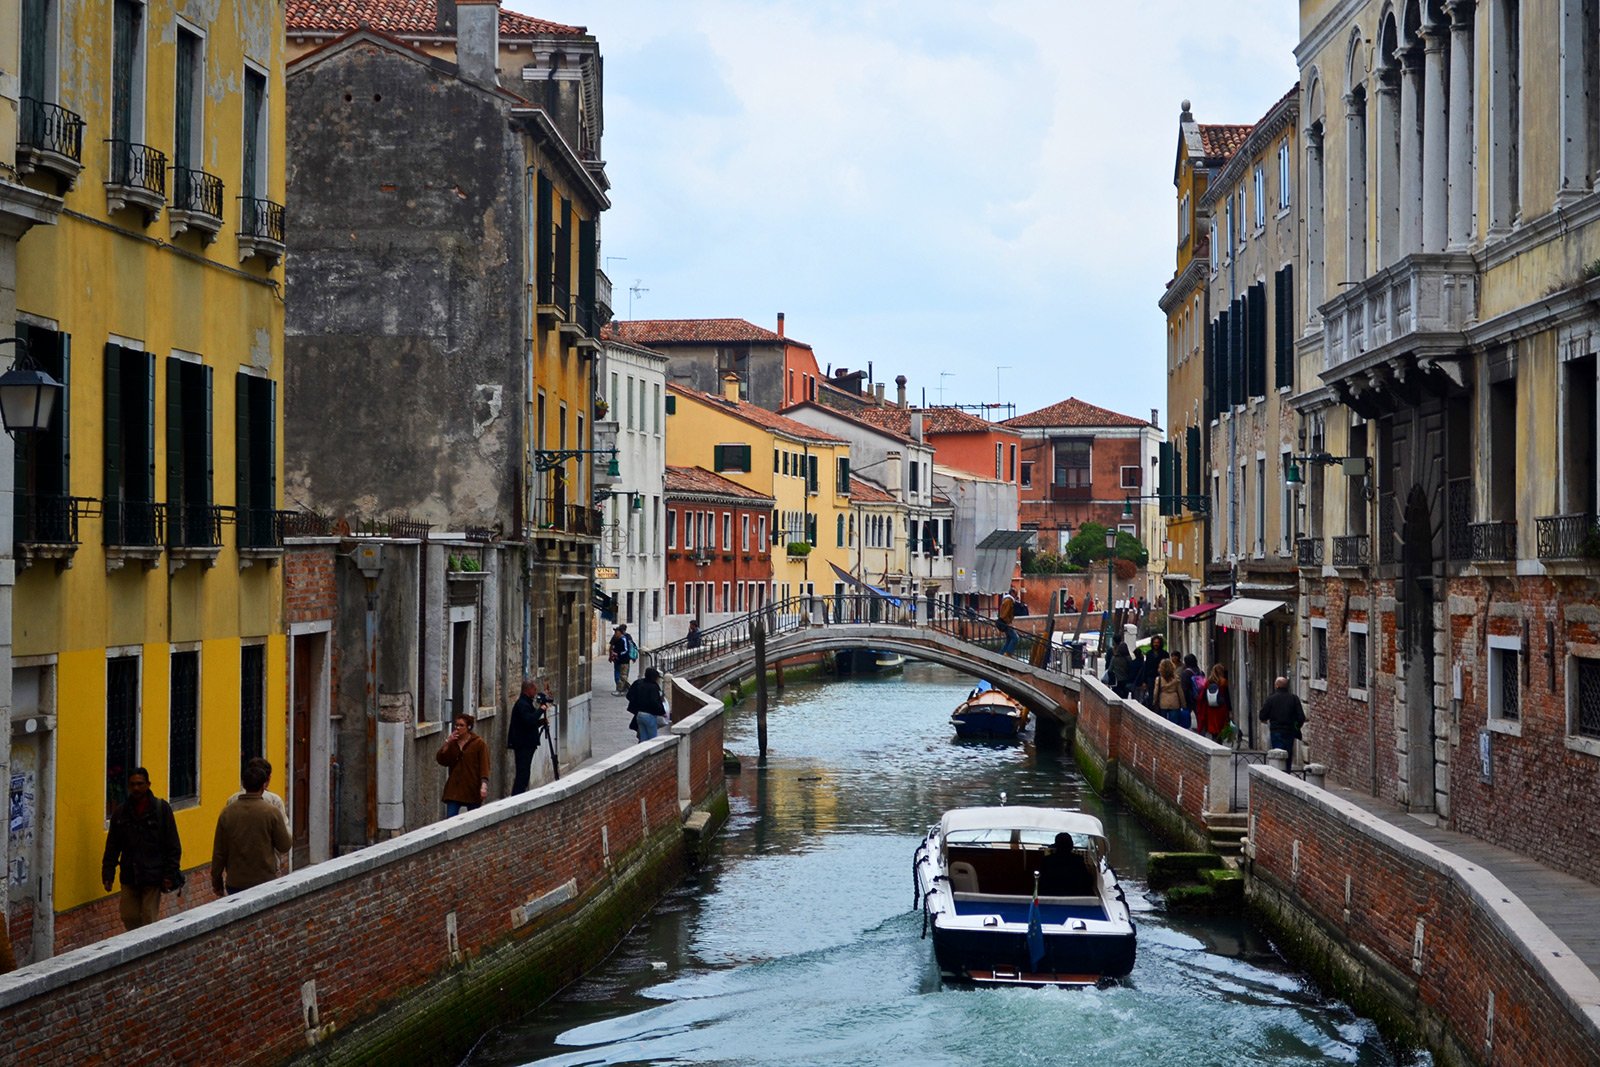 How to drive a motor boat through Venice canals in Venice